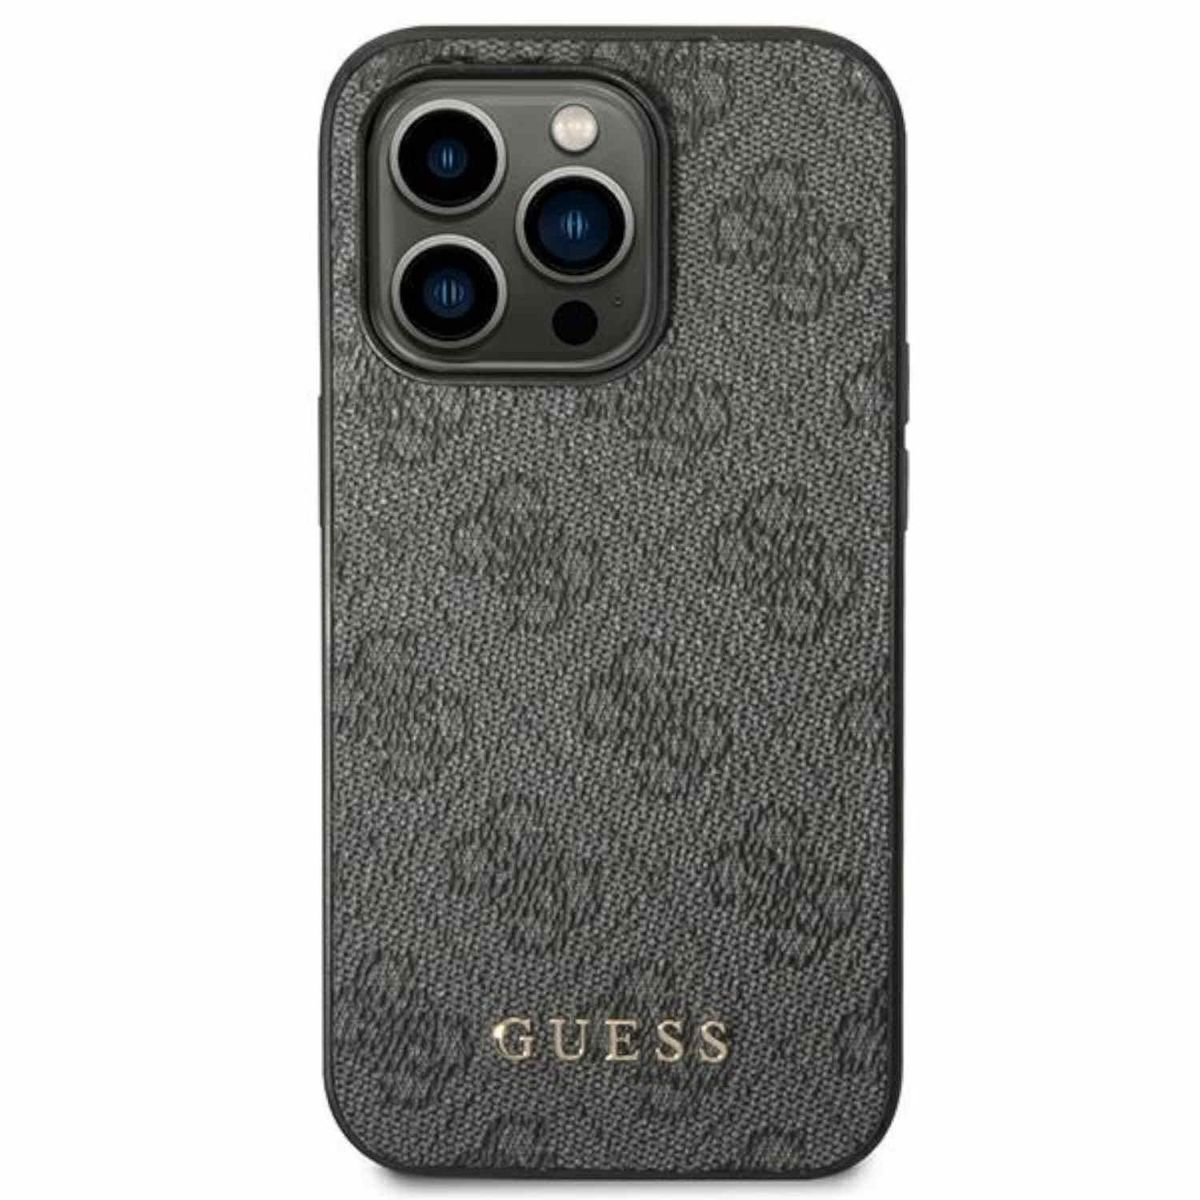 14 Logo 4G Pro Pro Full iPhone iPhone Metal (Grey), GUESS Multicolor Guess Case Max, Gold Apple, Max Cover, 14